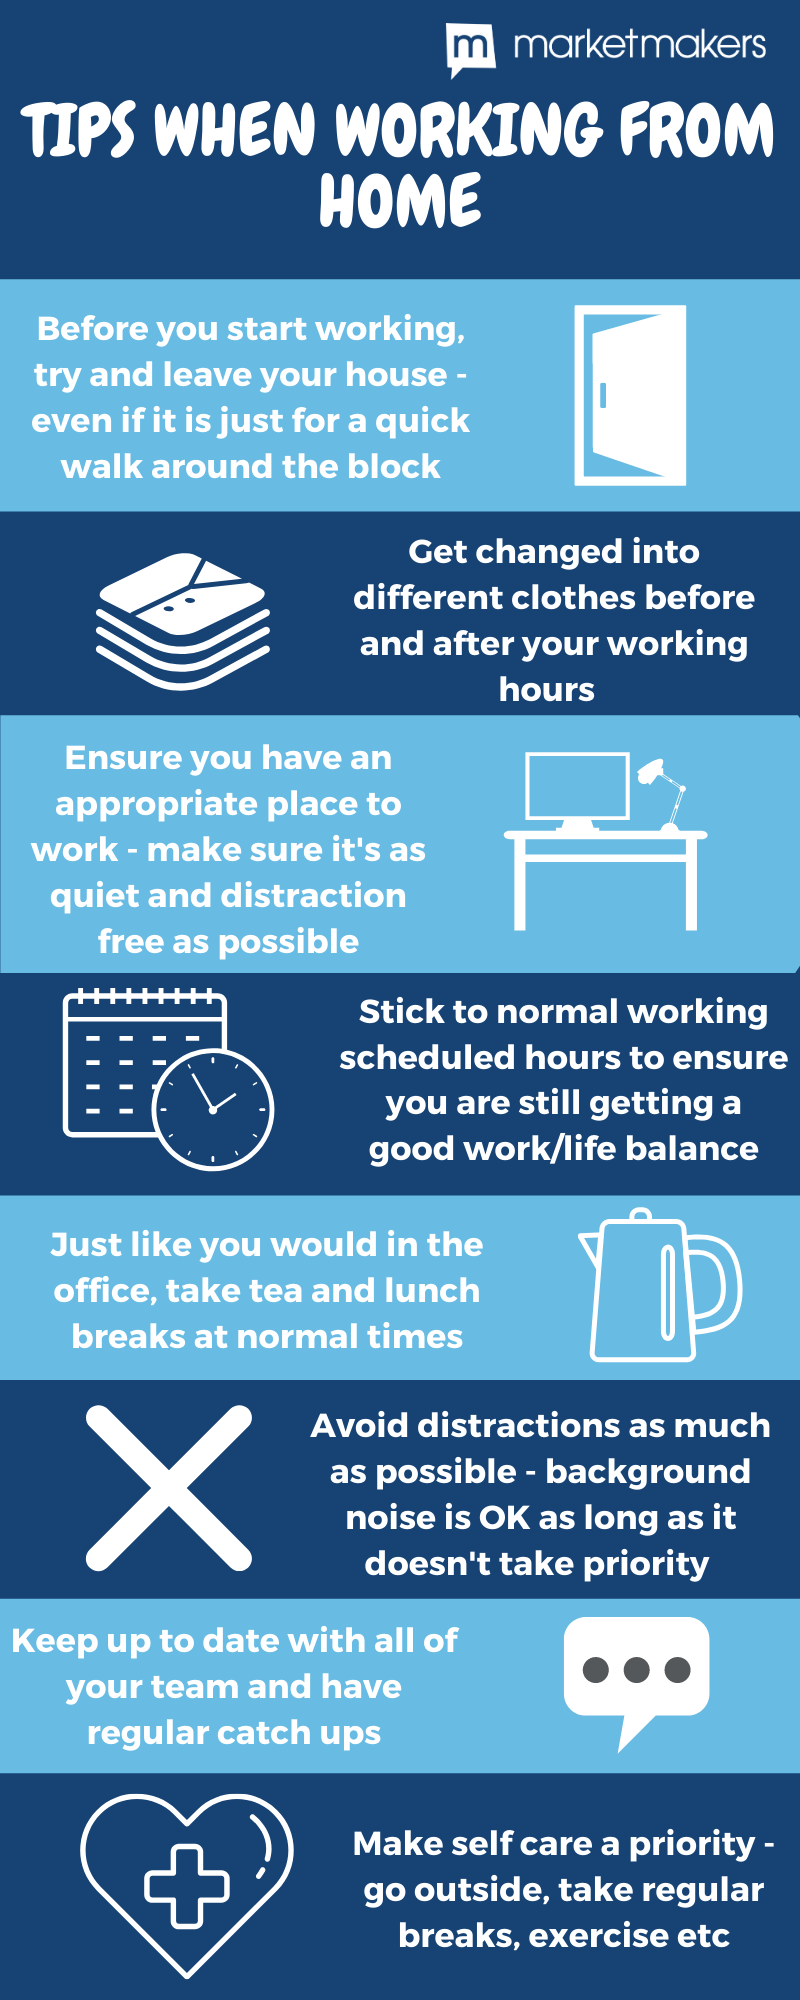 Tips when working from home - MarketMakers Top Tips when working from home